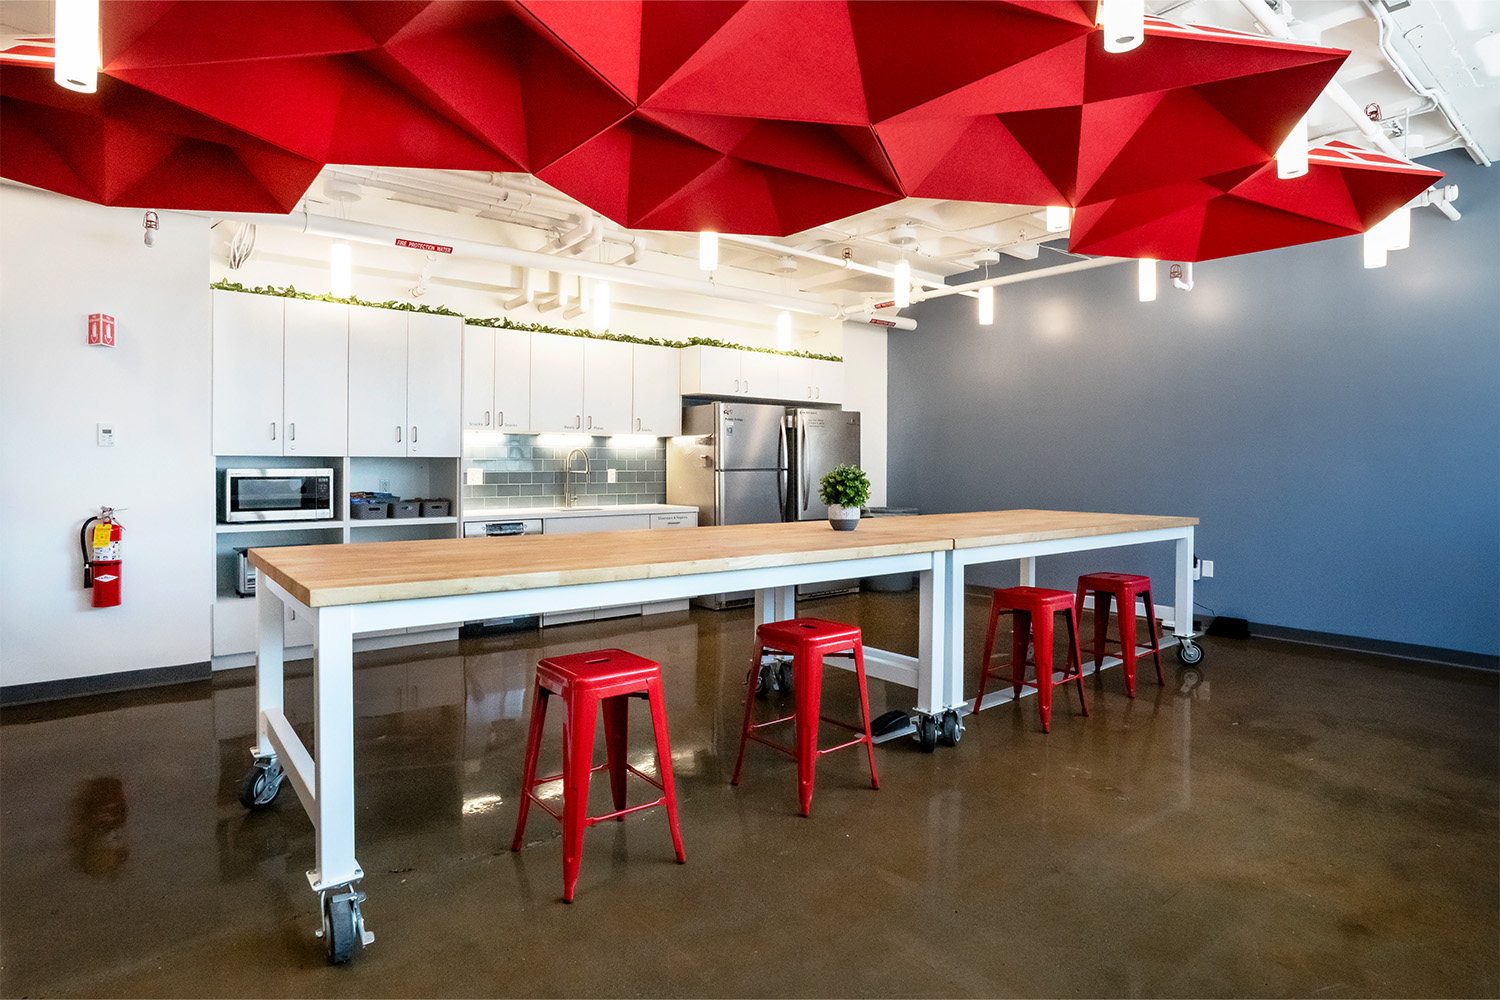 Kitchen with amenities, and modern red geometric ceiling design to match with red chairs